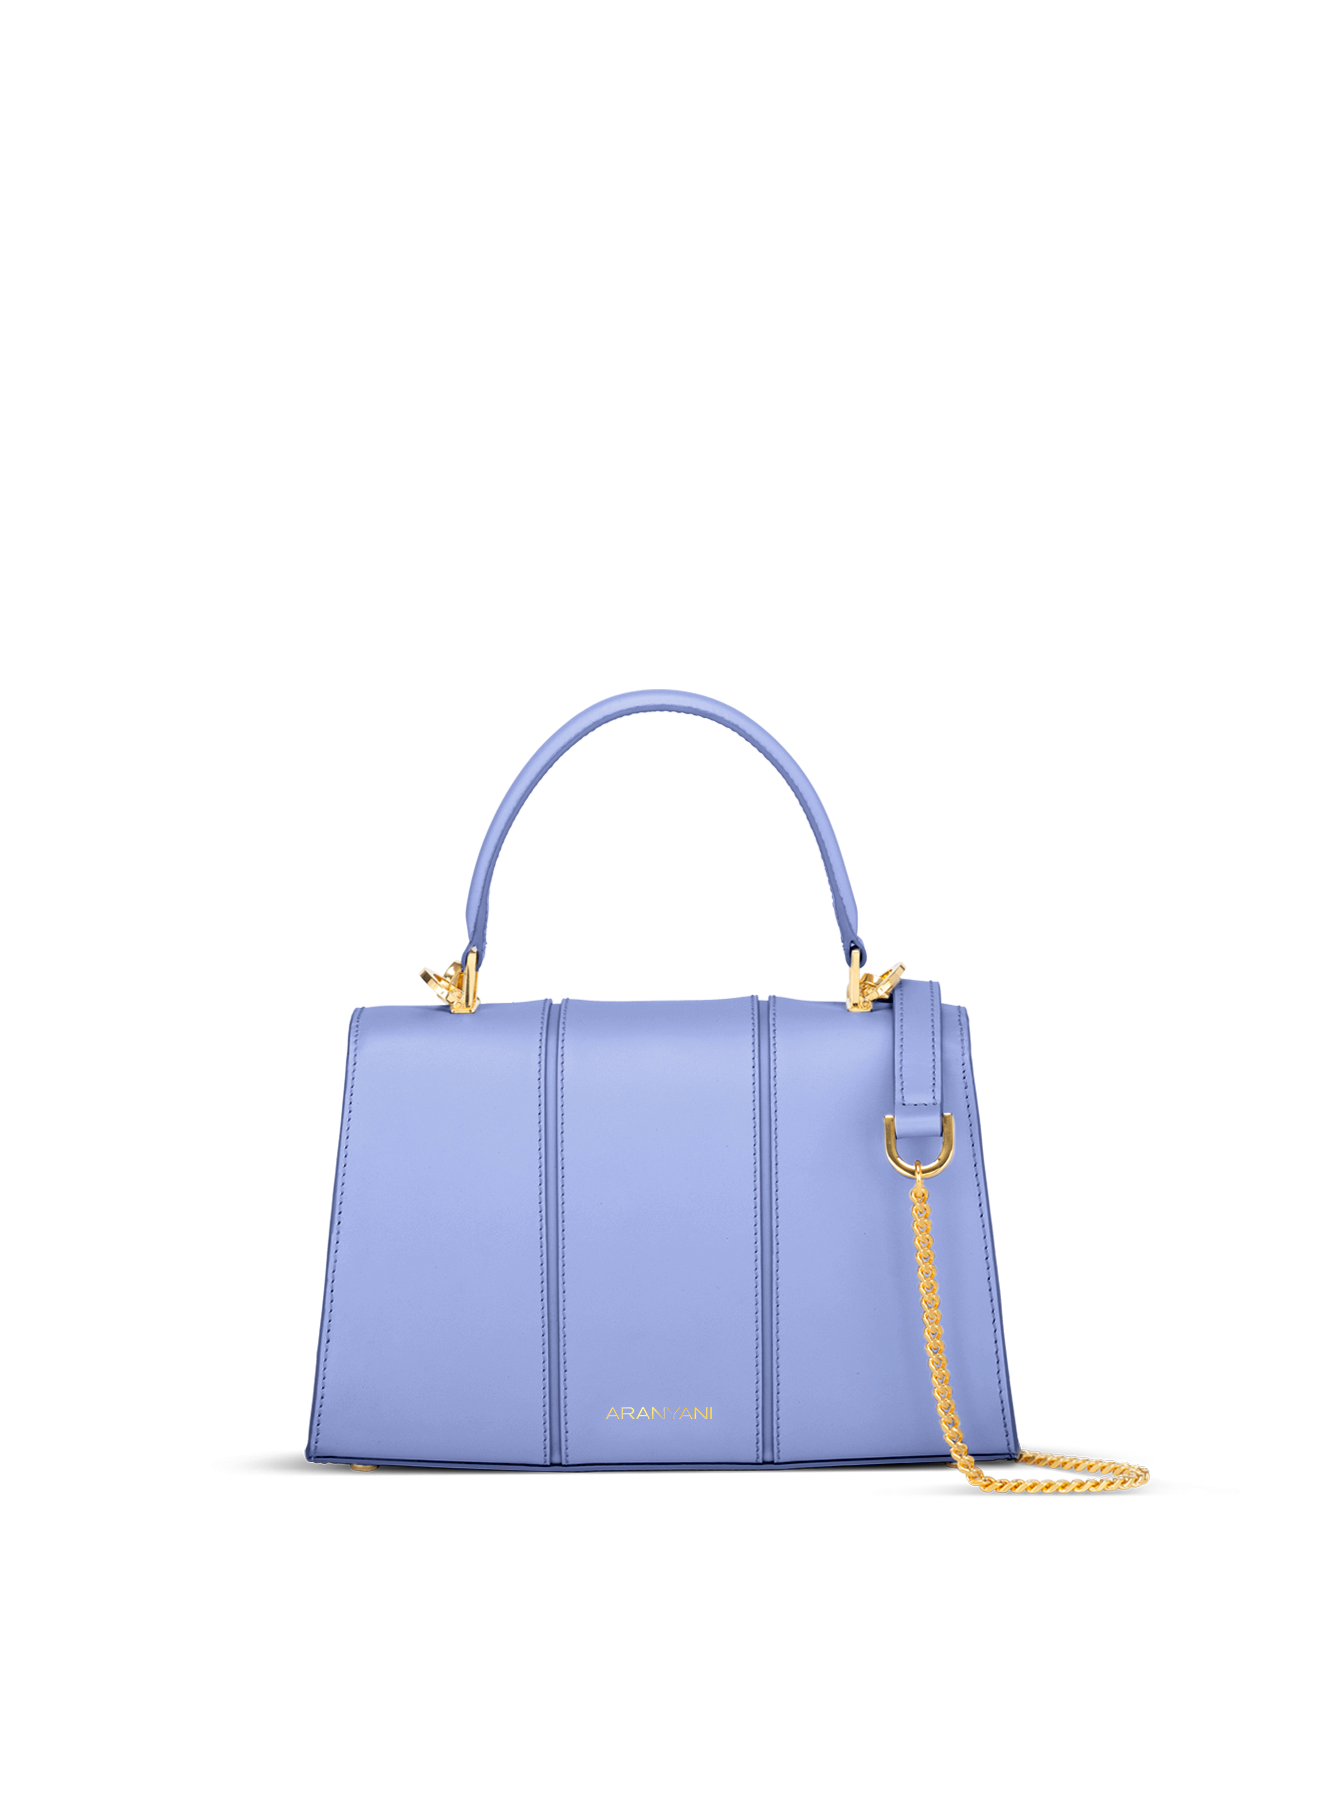 Tranquil Blue / Finest Calf Napa Leather